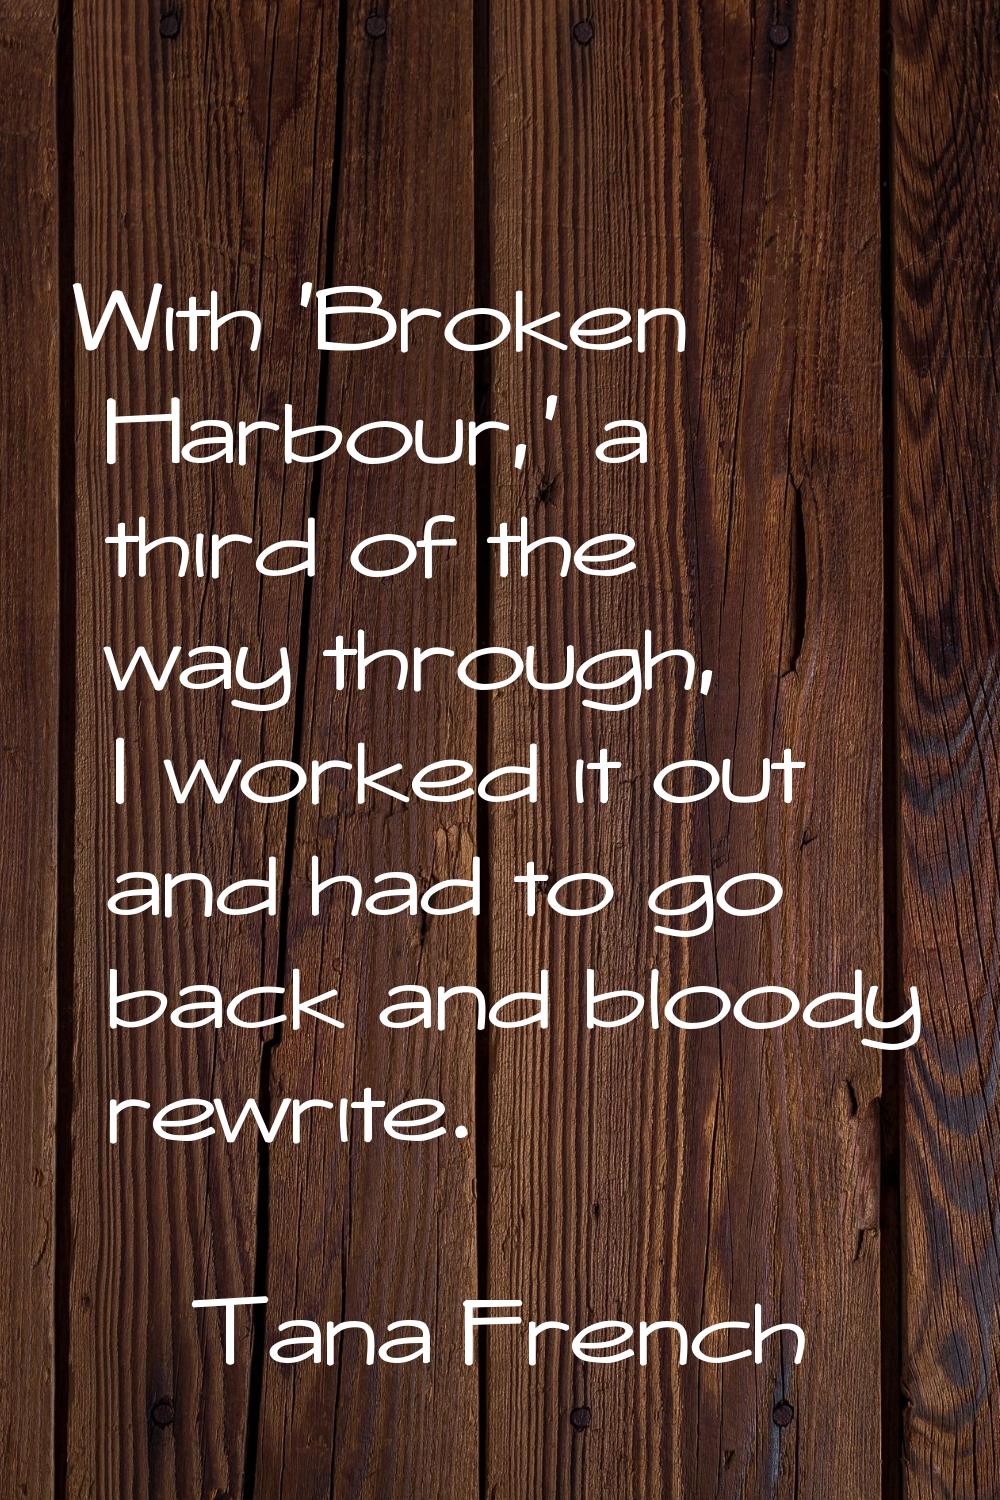 With 'Broken Harbour,' a third of the way through, I worked it out and had to go back and bloody re